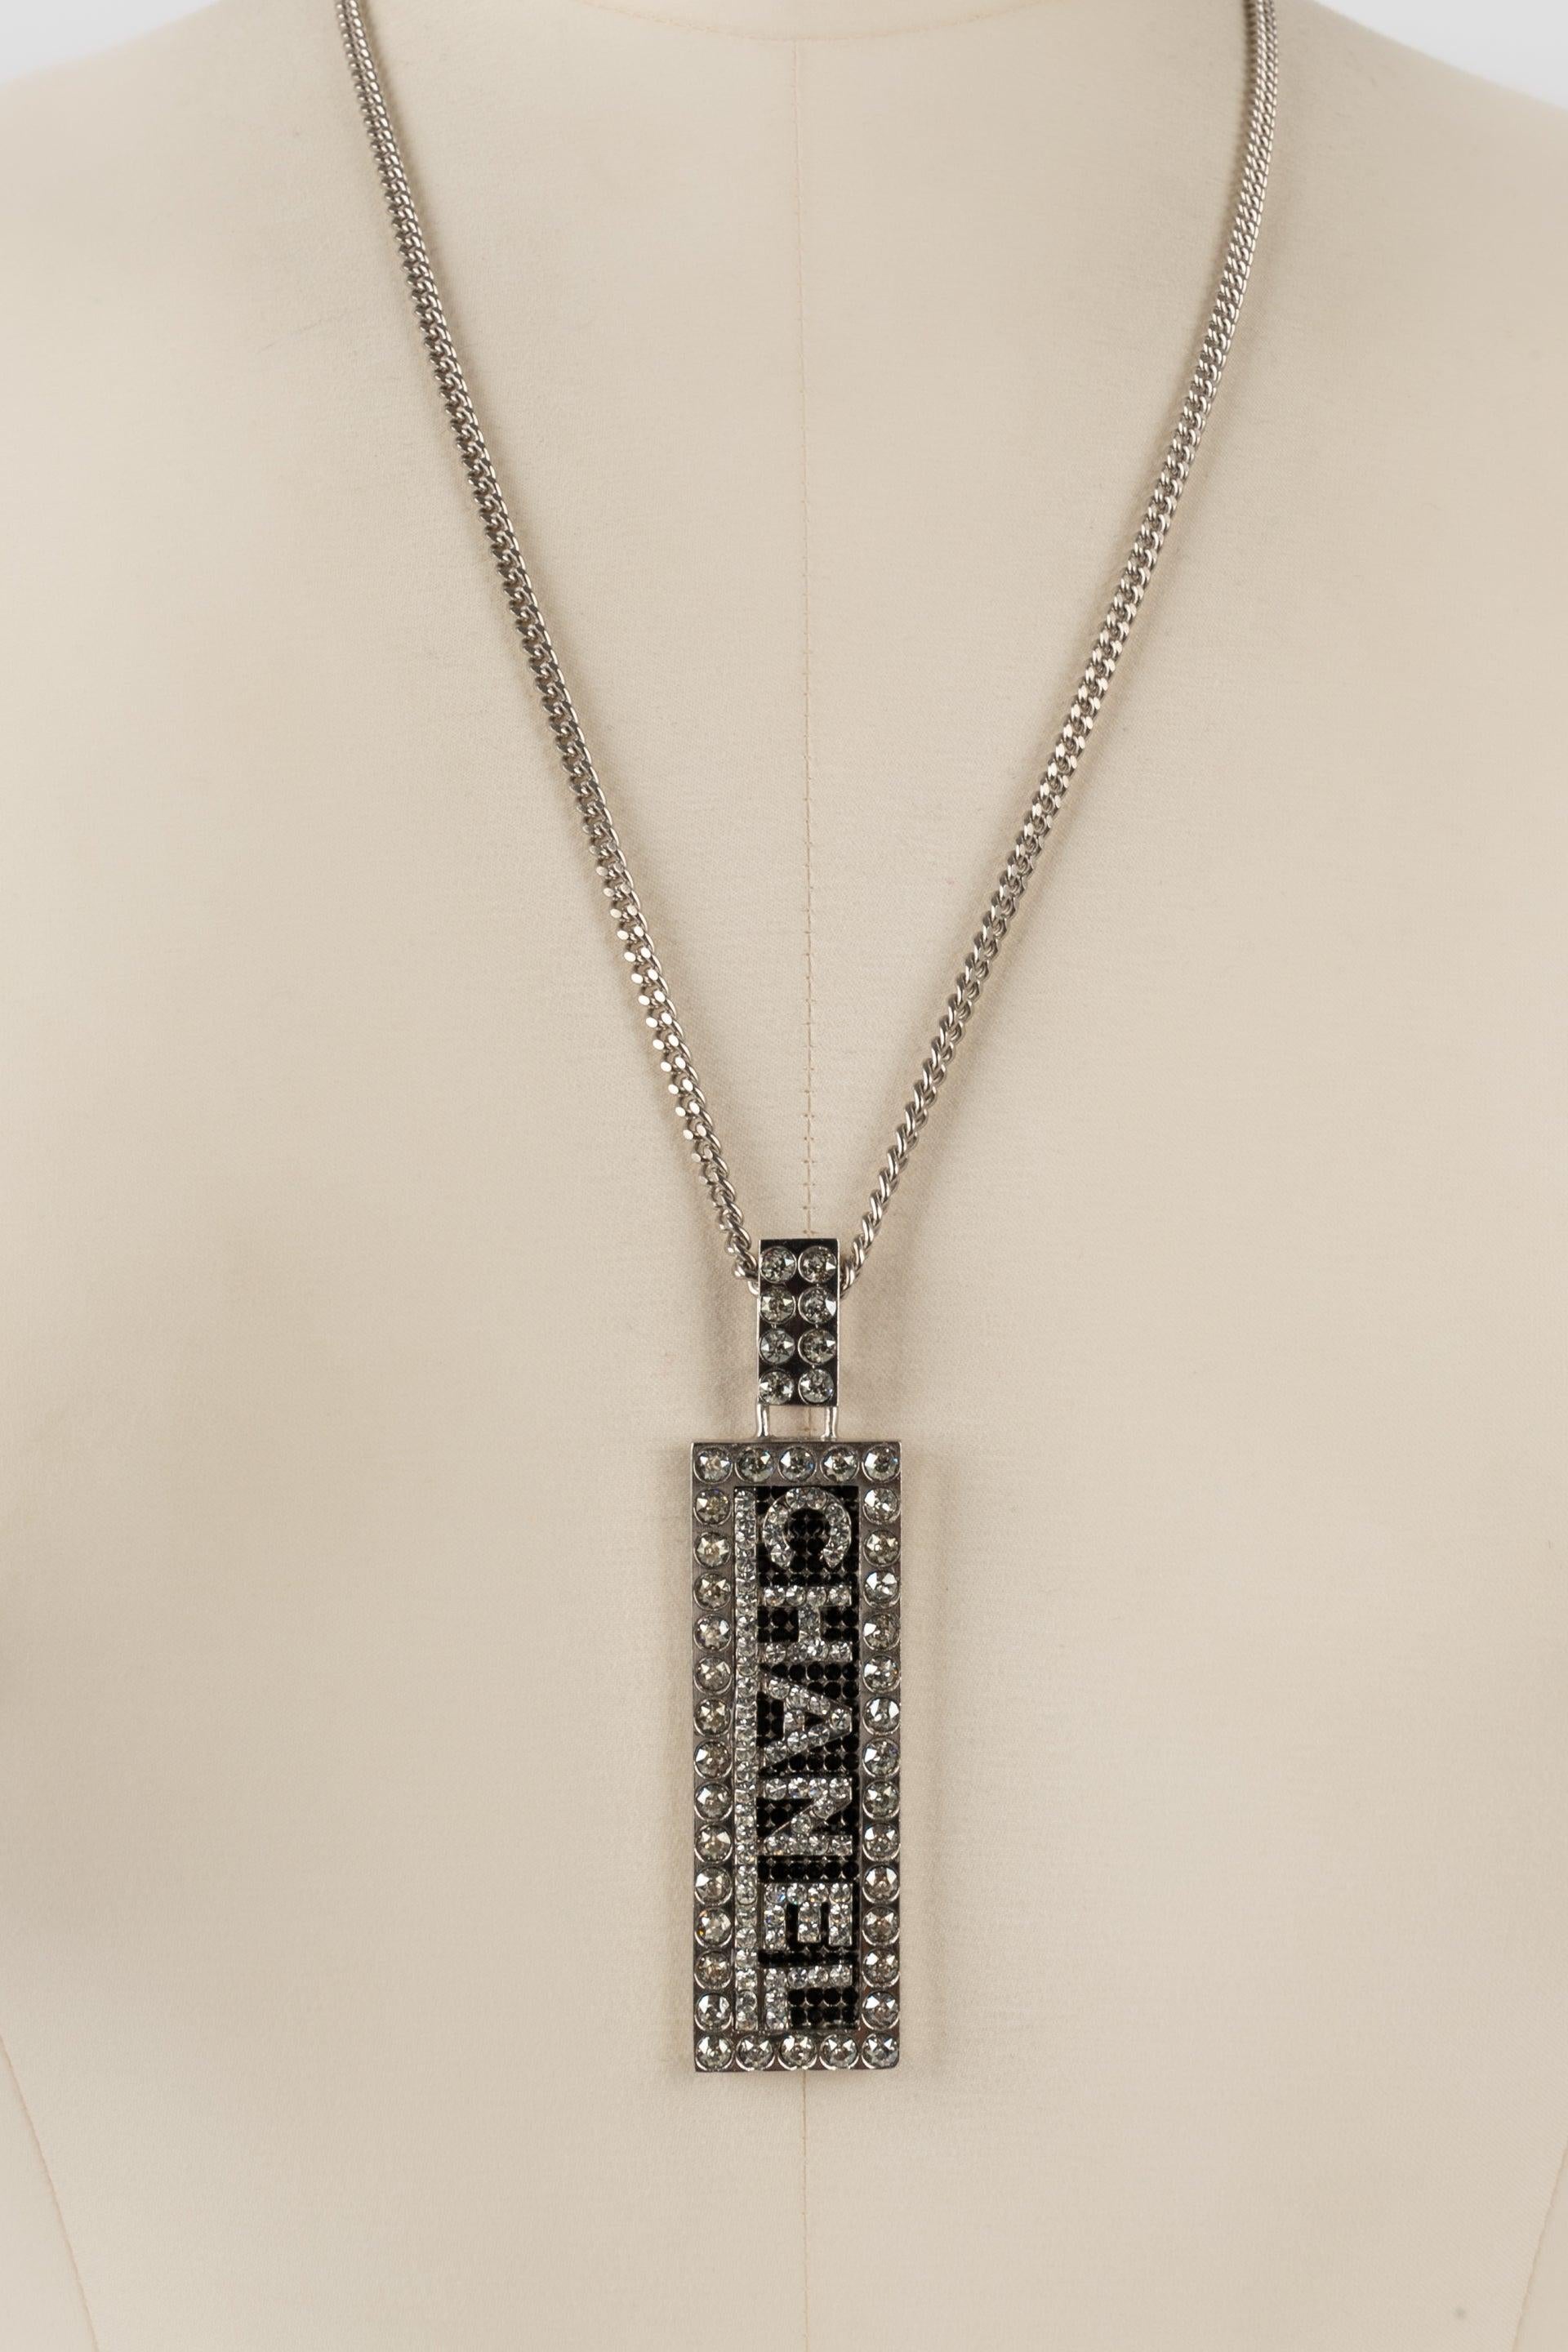 Chanel Silvery Metal Necklace with a Swarovski Rhinestone Pendant, Fall 2003 In Excellent Condition For Sale In SAINT-OUEN-SUR-SEINE, FR